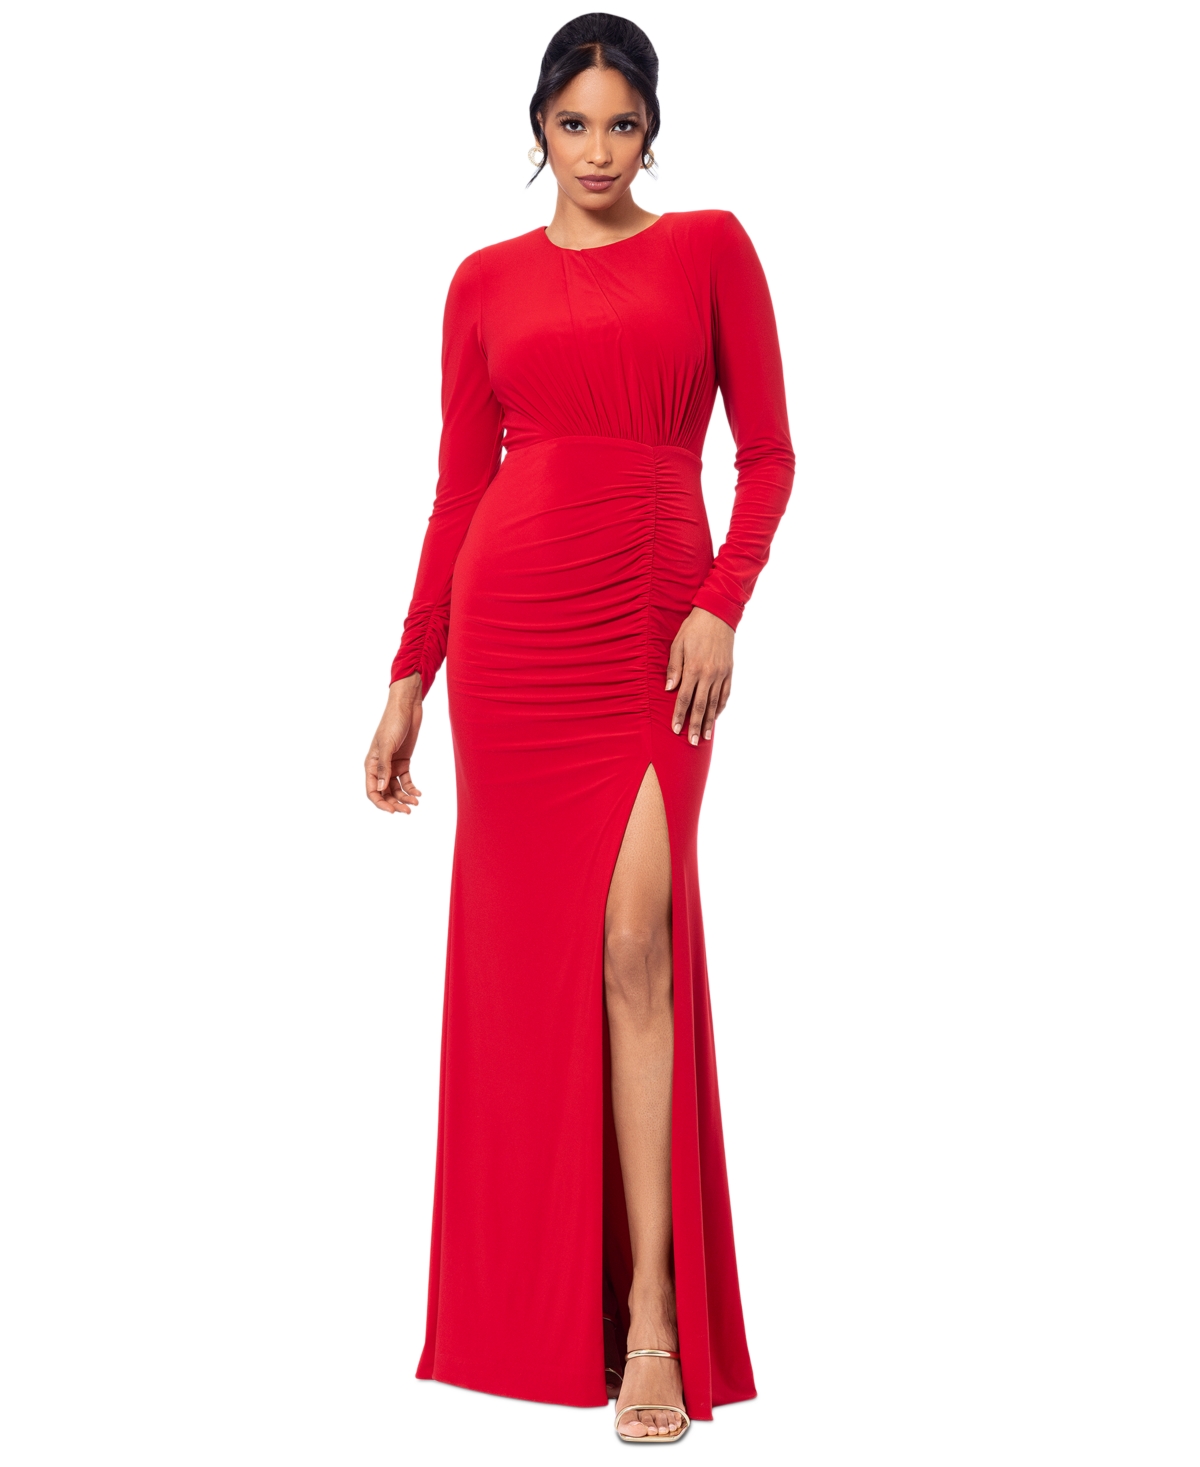 Women's Ruched Long-Sleeve Slit Gown - Red